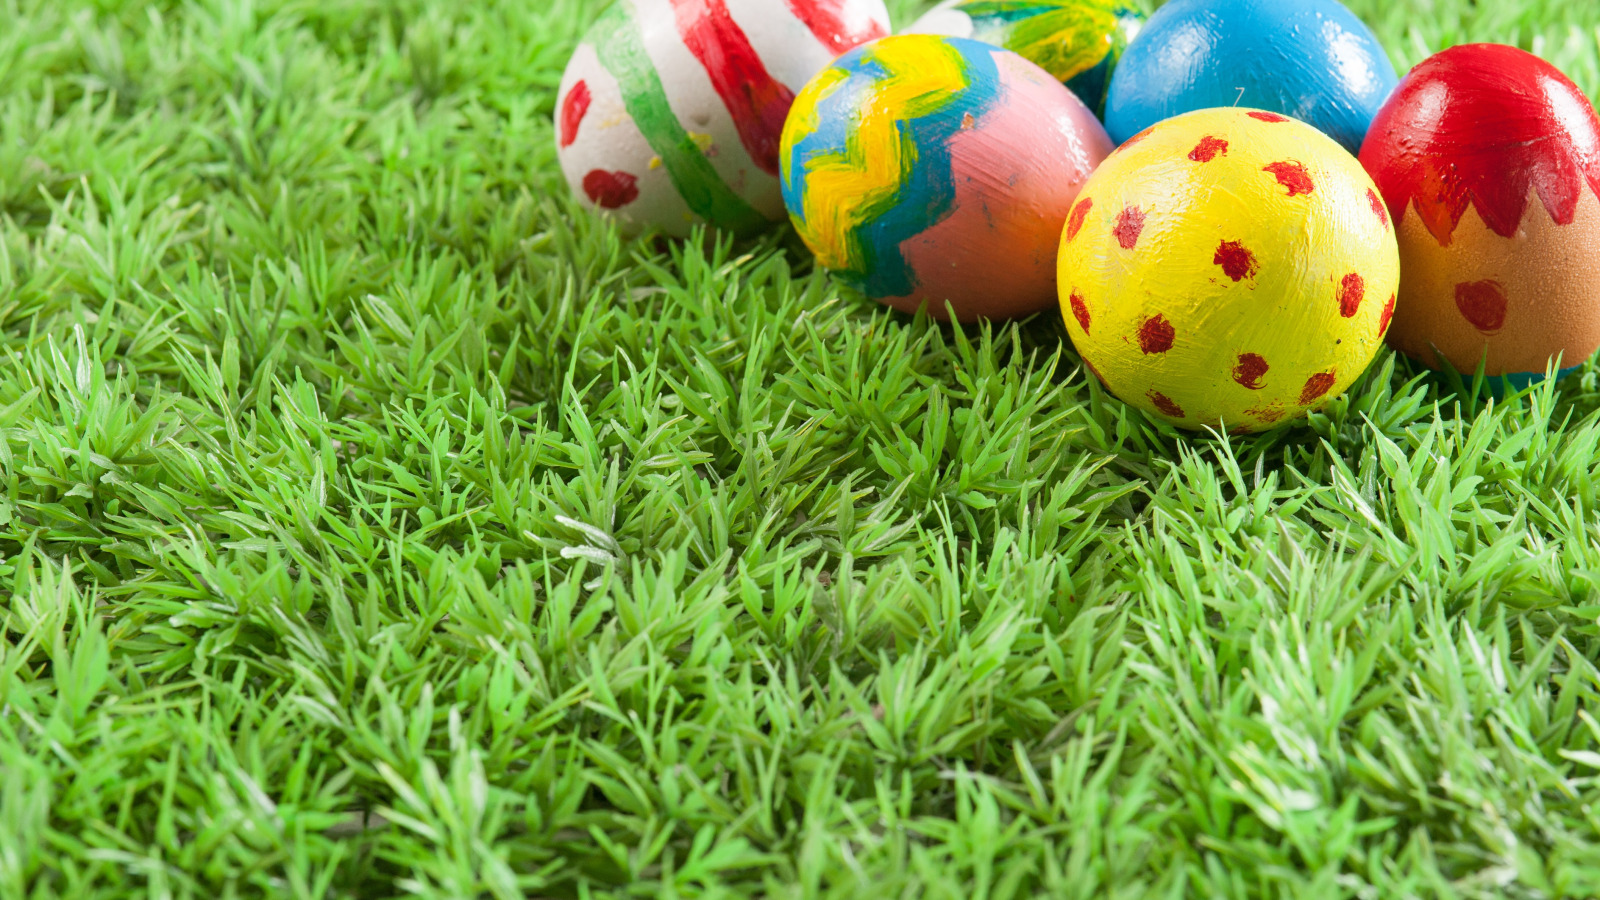 Download wallpaper eggs, Easter, weed, Holiday, section holidays in resolut...